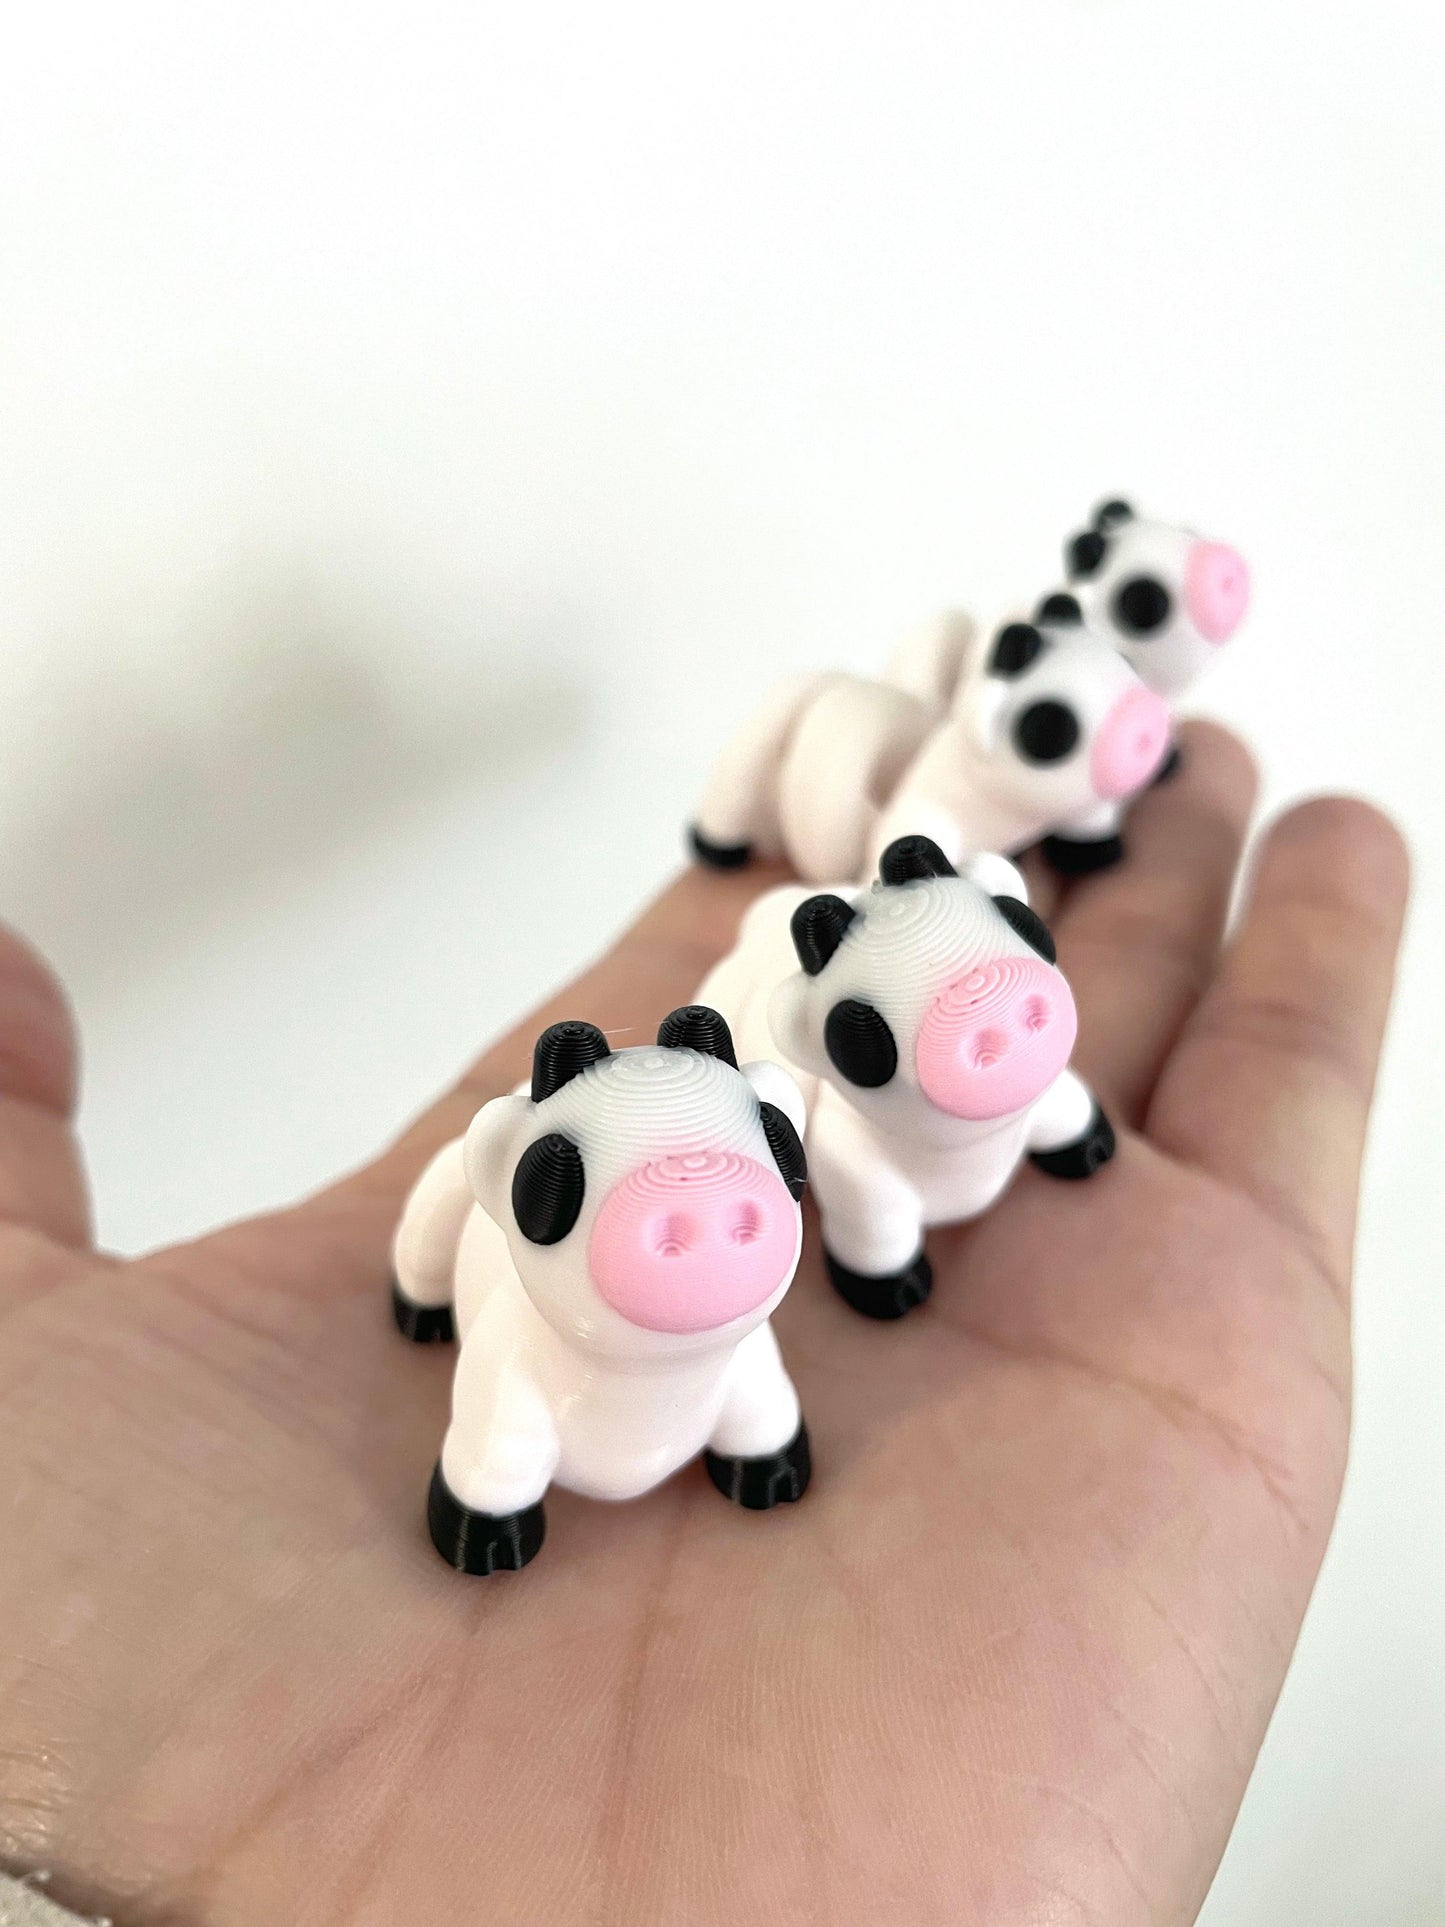 Mini Moo Cows - Fantasy Forest 3D